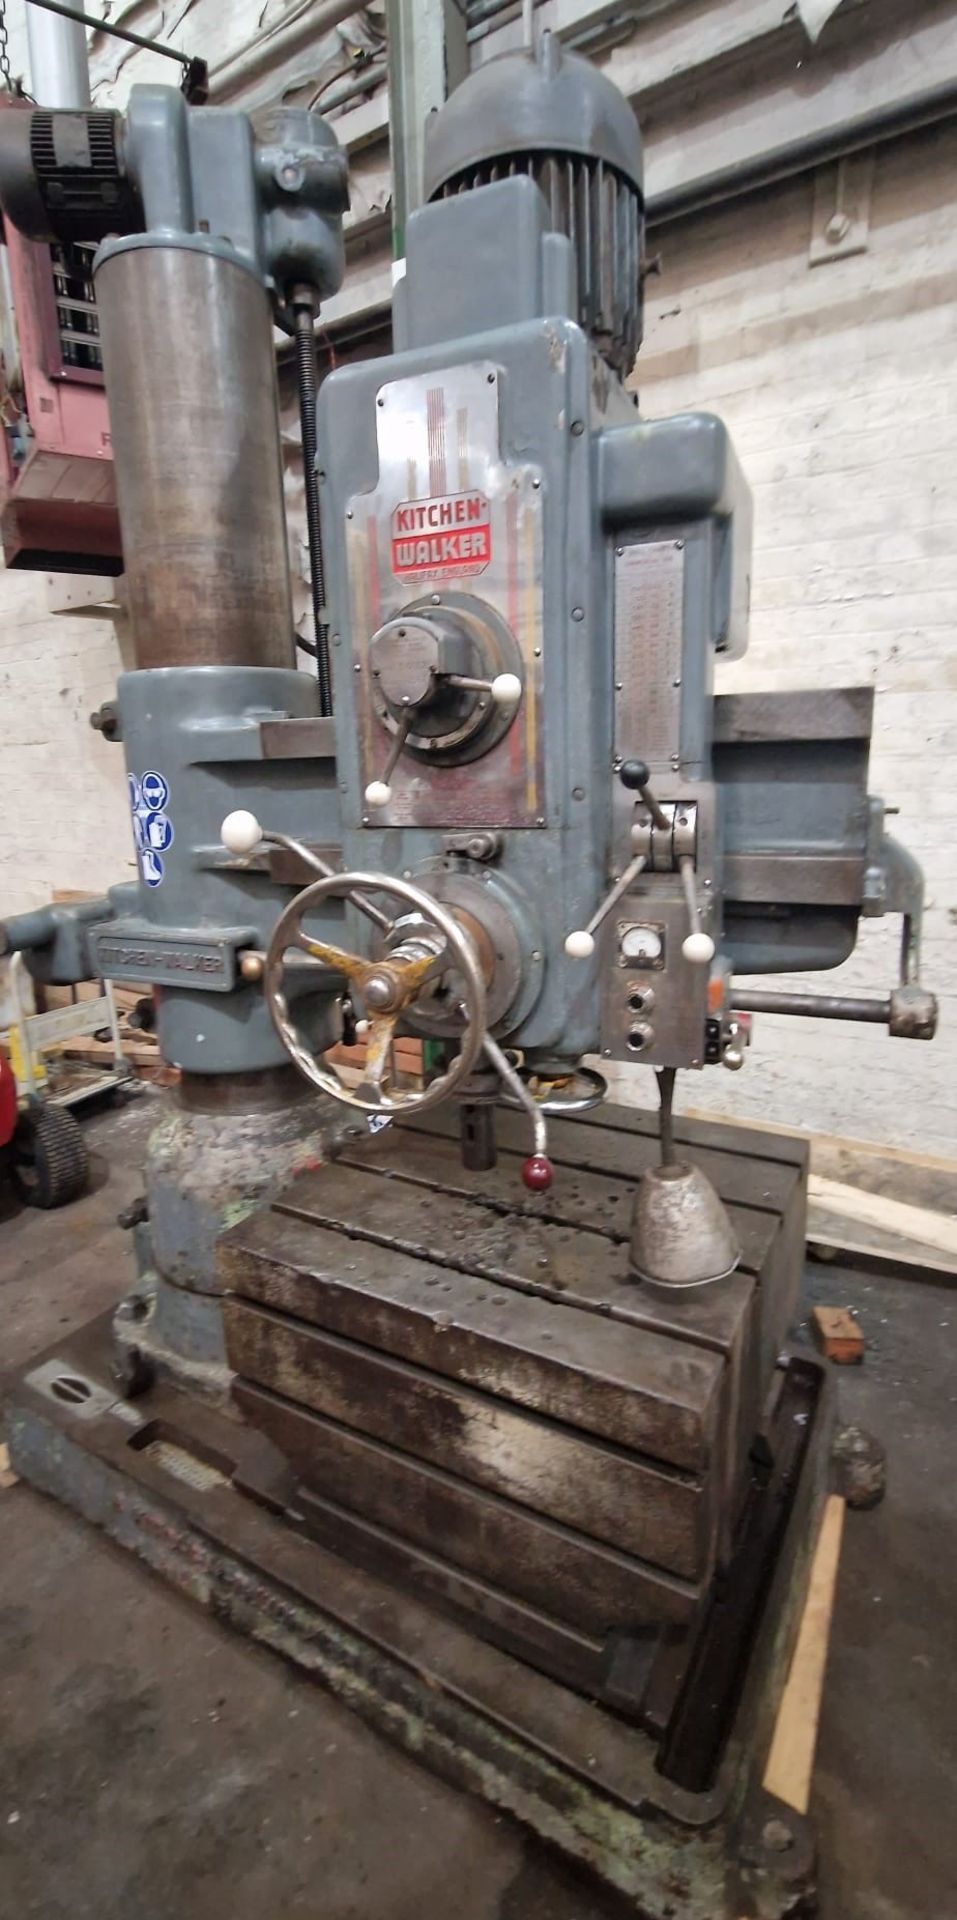 Kitchen and Walker 3’-0” E2 Radial Drill